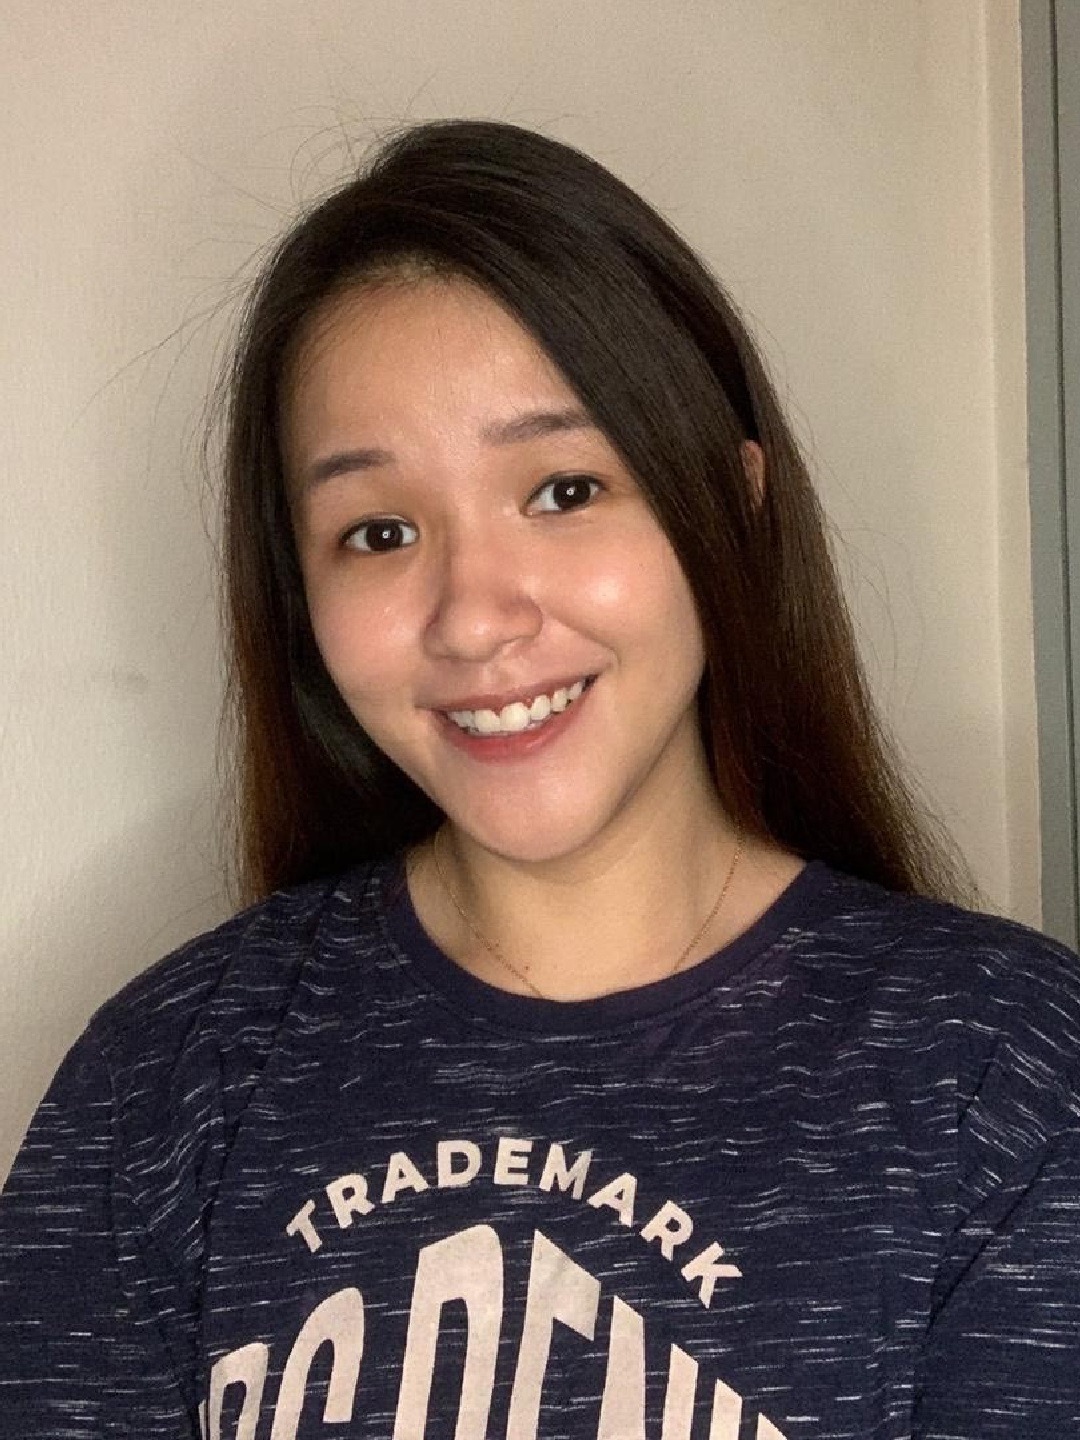 “I started my university journey at Curtin Malaysia as soon as I completed secondary school, but now in my final year, final semester, I never thought I would have to undergo the last leg of the journey learning online off-campus due to the global...